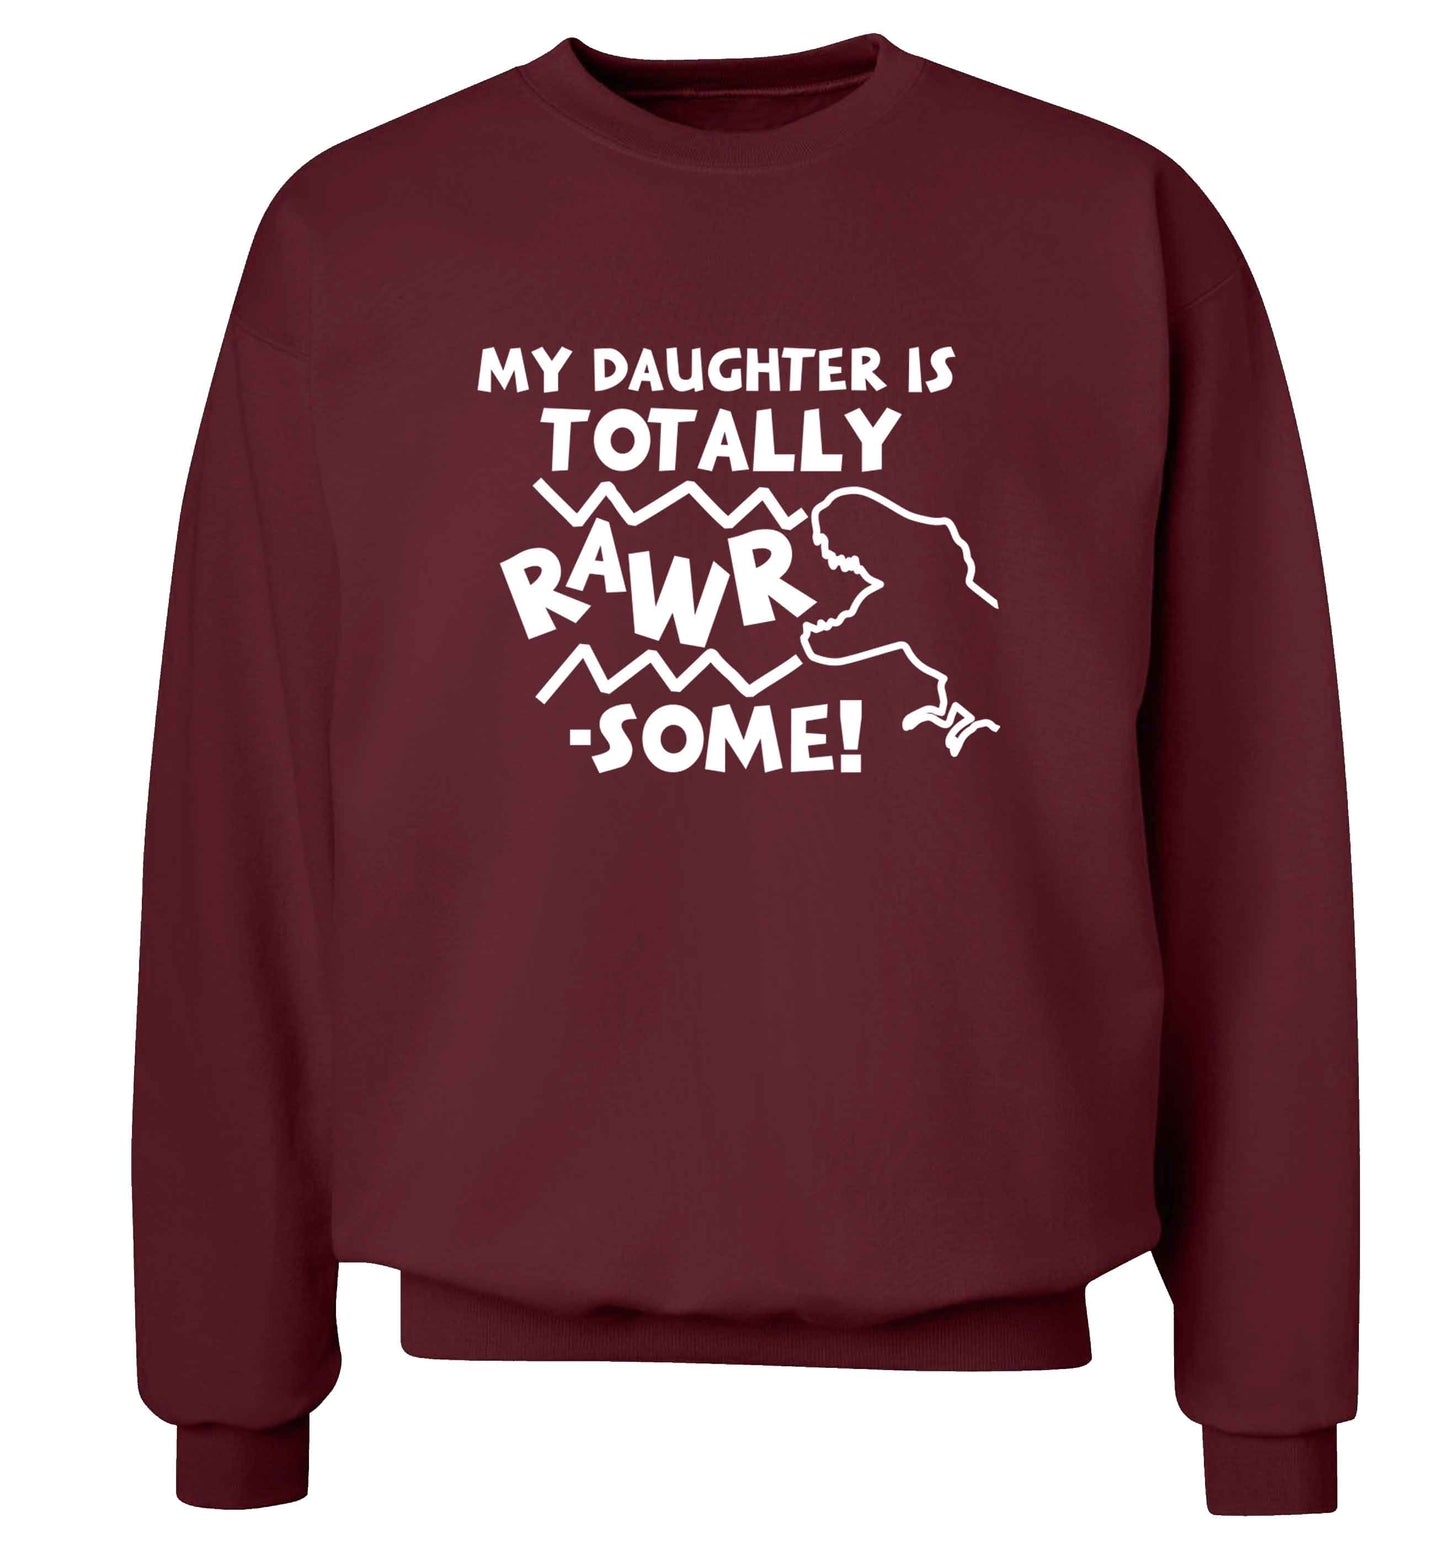 My daughter is totally rawrsome adult's unisex maroon sweater 2XL